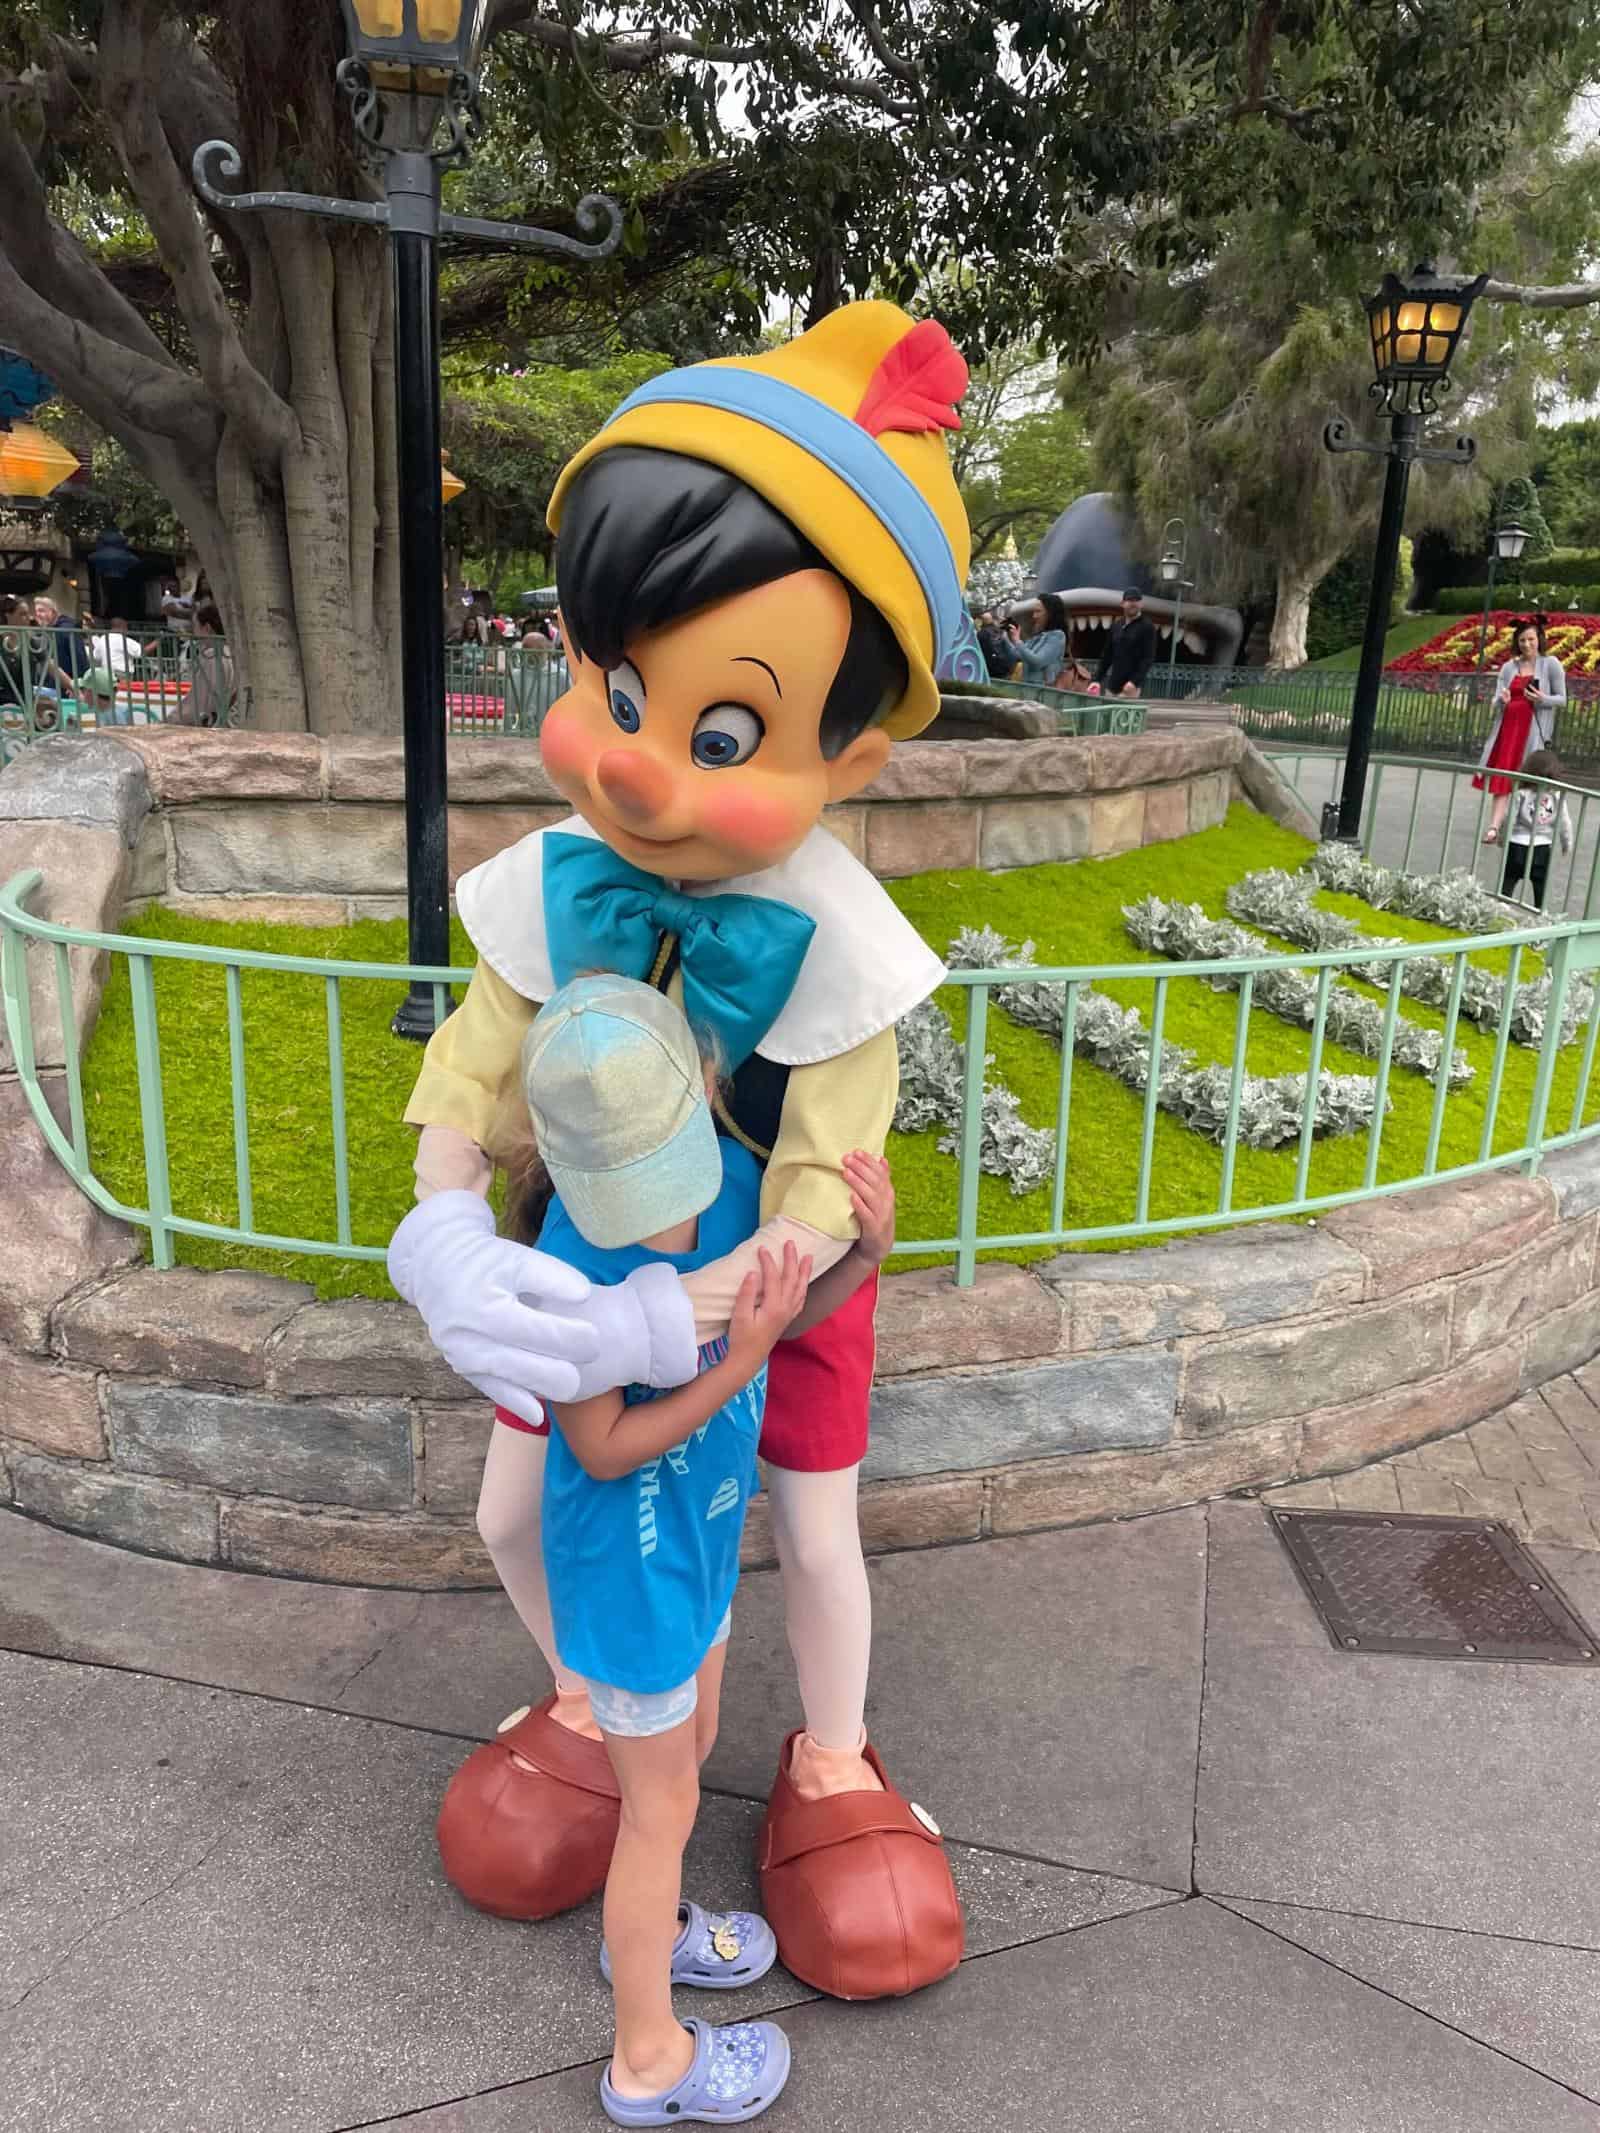 Where to meet characters at Disneyland with toddlers / Best Questions to ask Disney characters